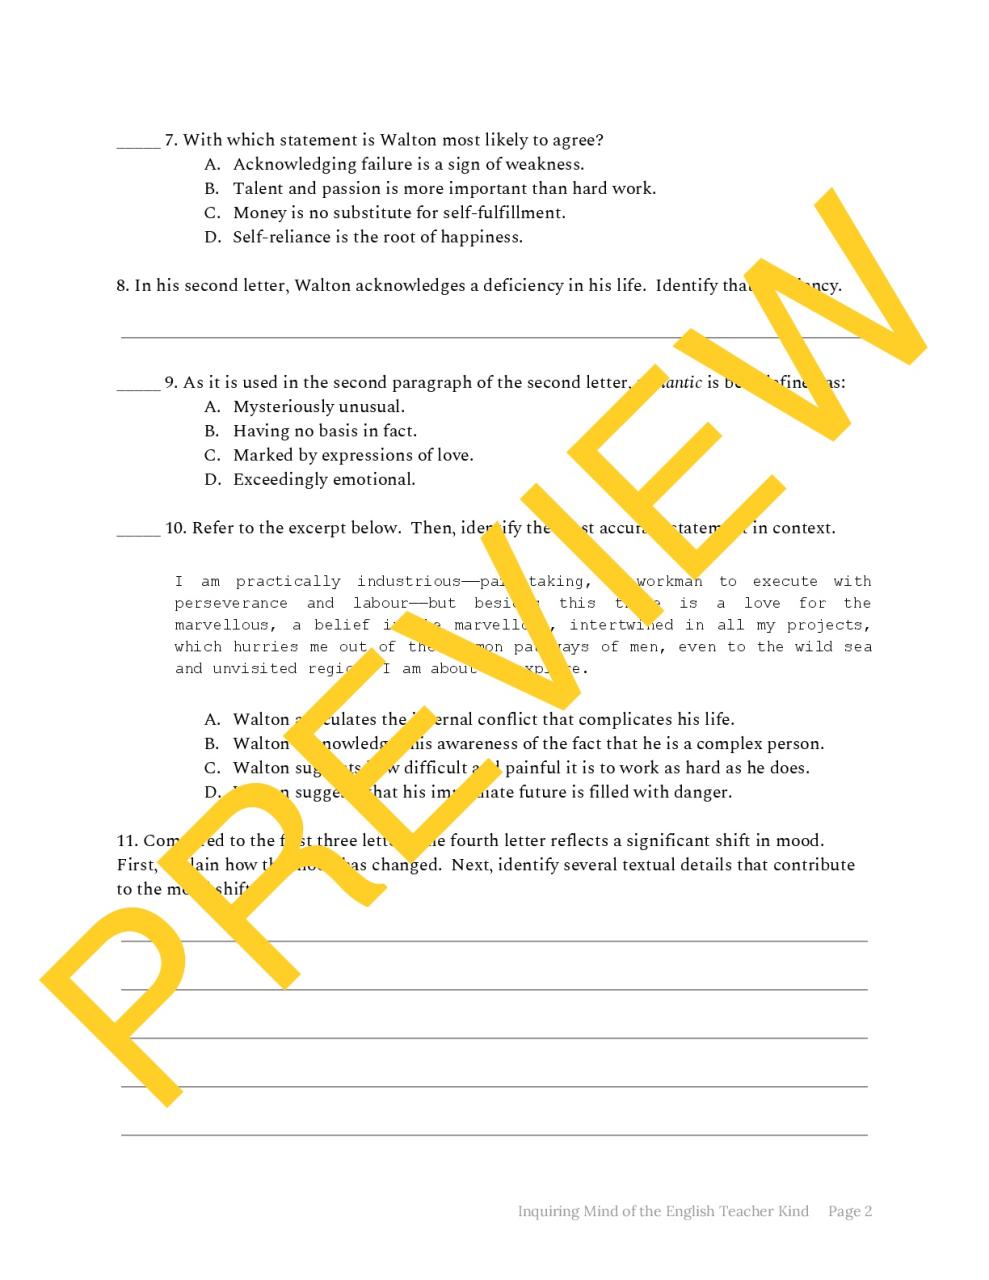 Frankenstein Close Reading Worksheet on Letters 14 Teaching Resources